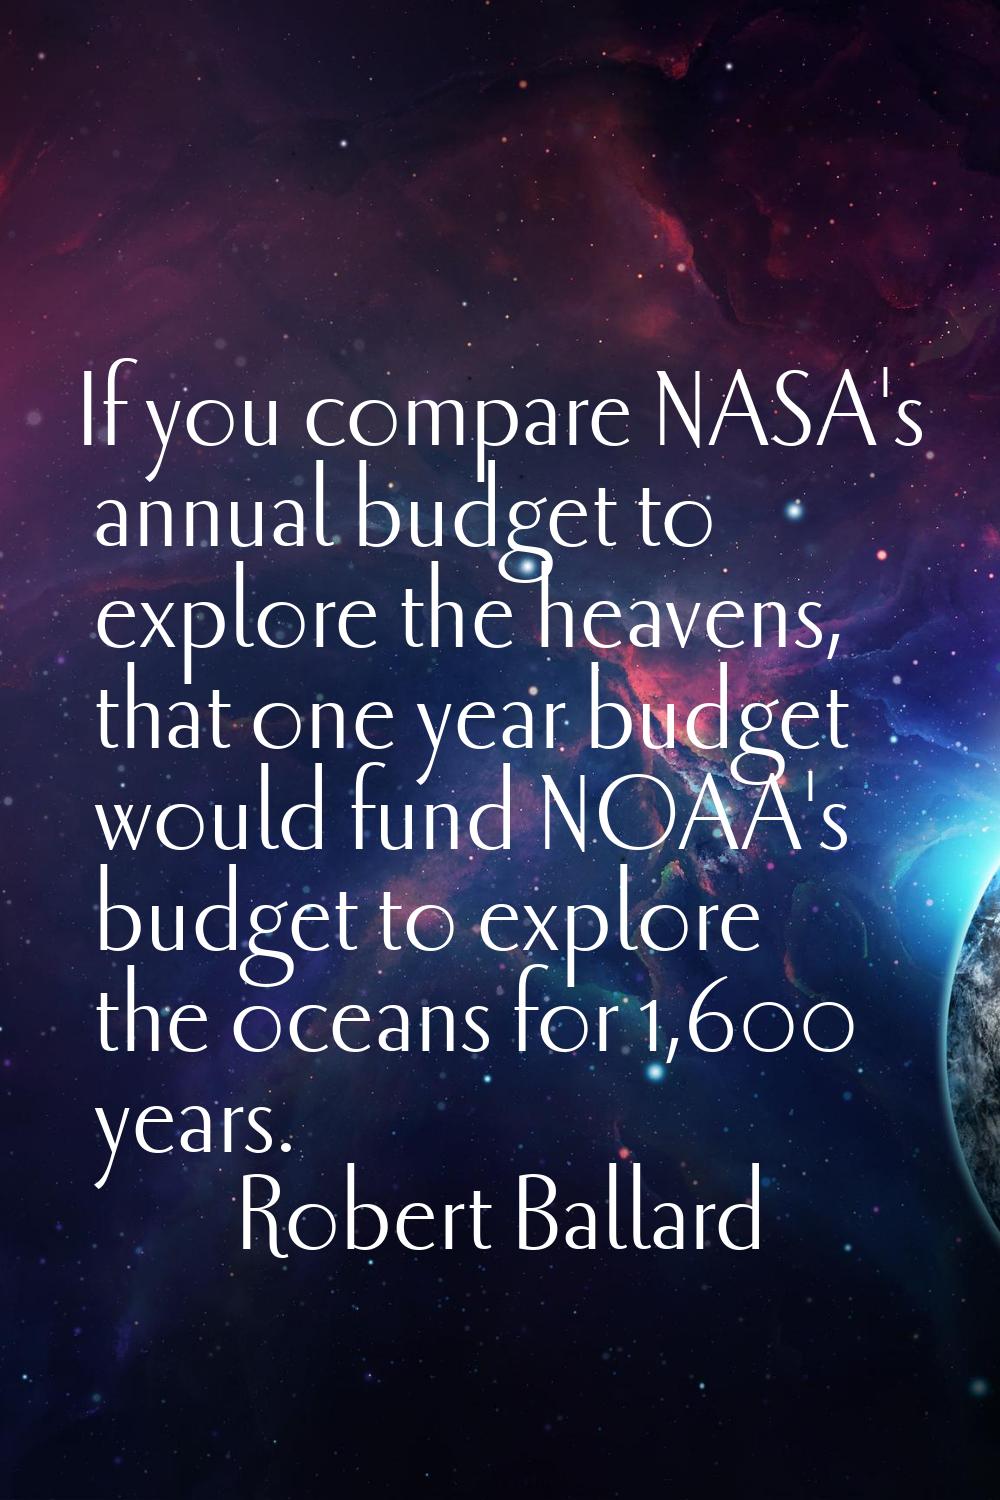 If you compare NASA's annual budget to explore the heavens, that one year budget would fund NOAA's 